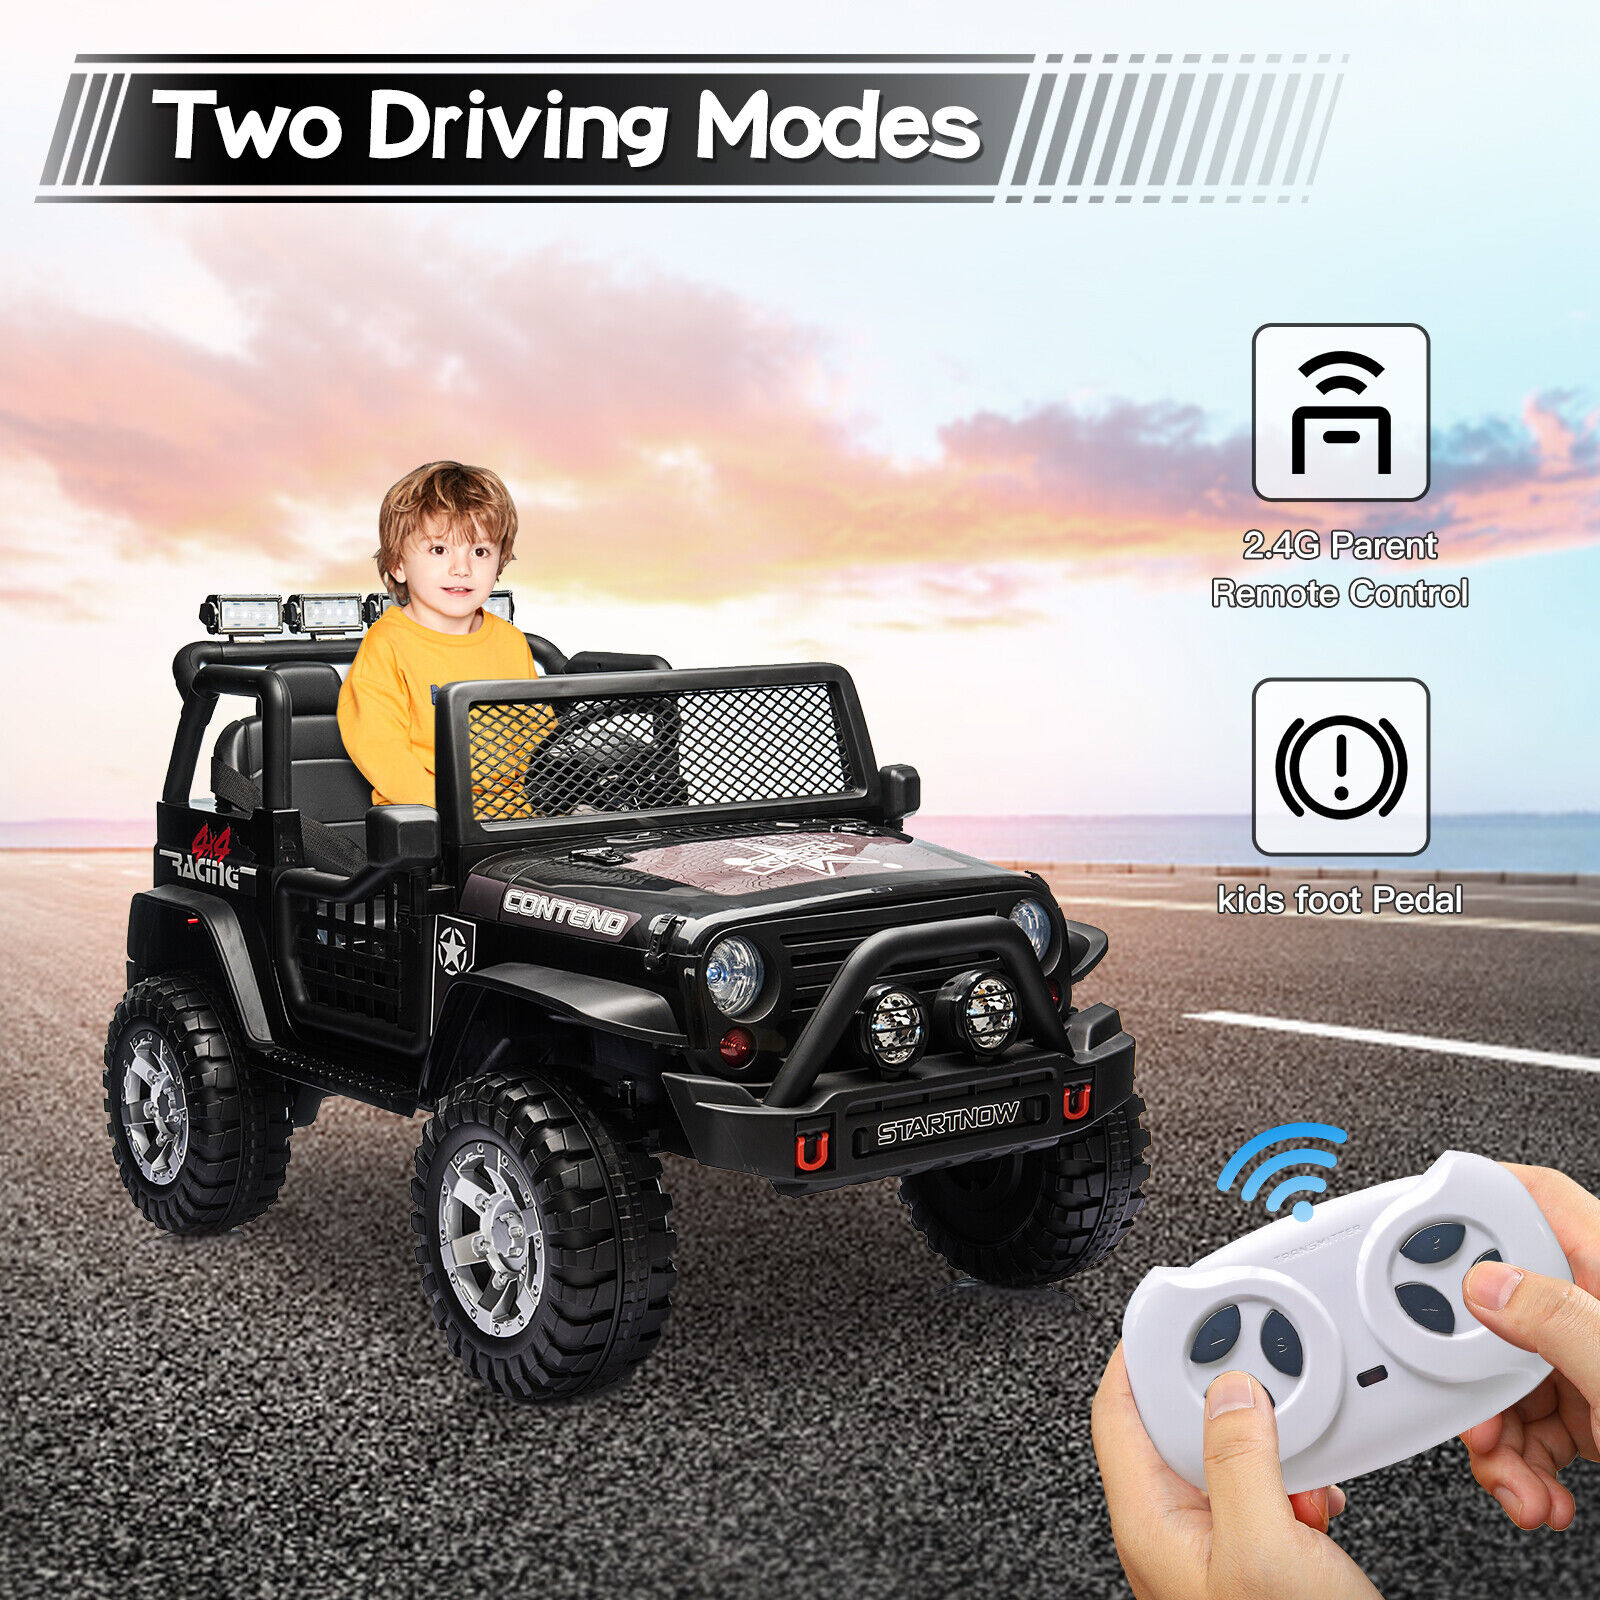 thinkstar 12V Kids Ride On Car 2 Seater Electric Vehicle Toy Truck Jeep Mp3 Remote Control